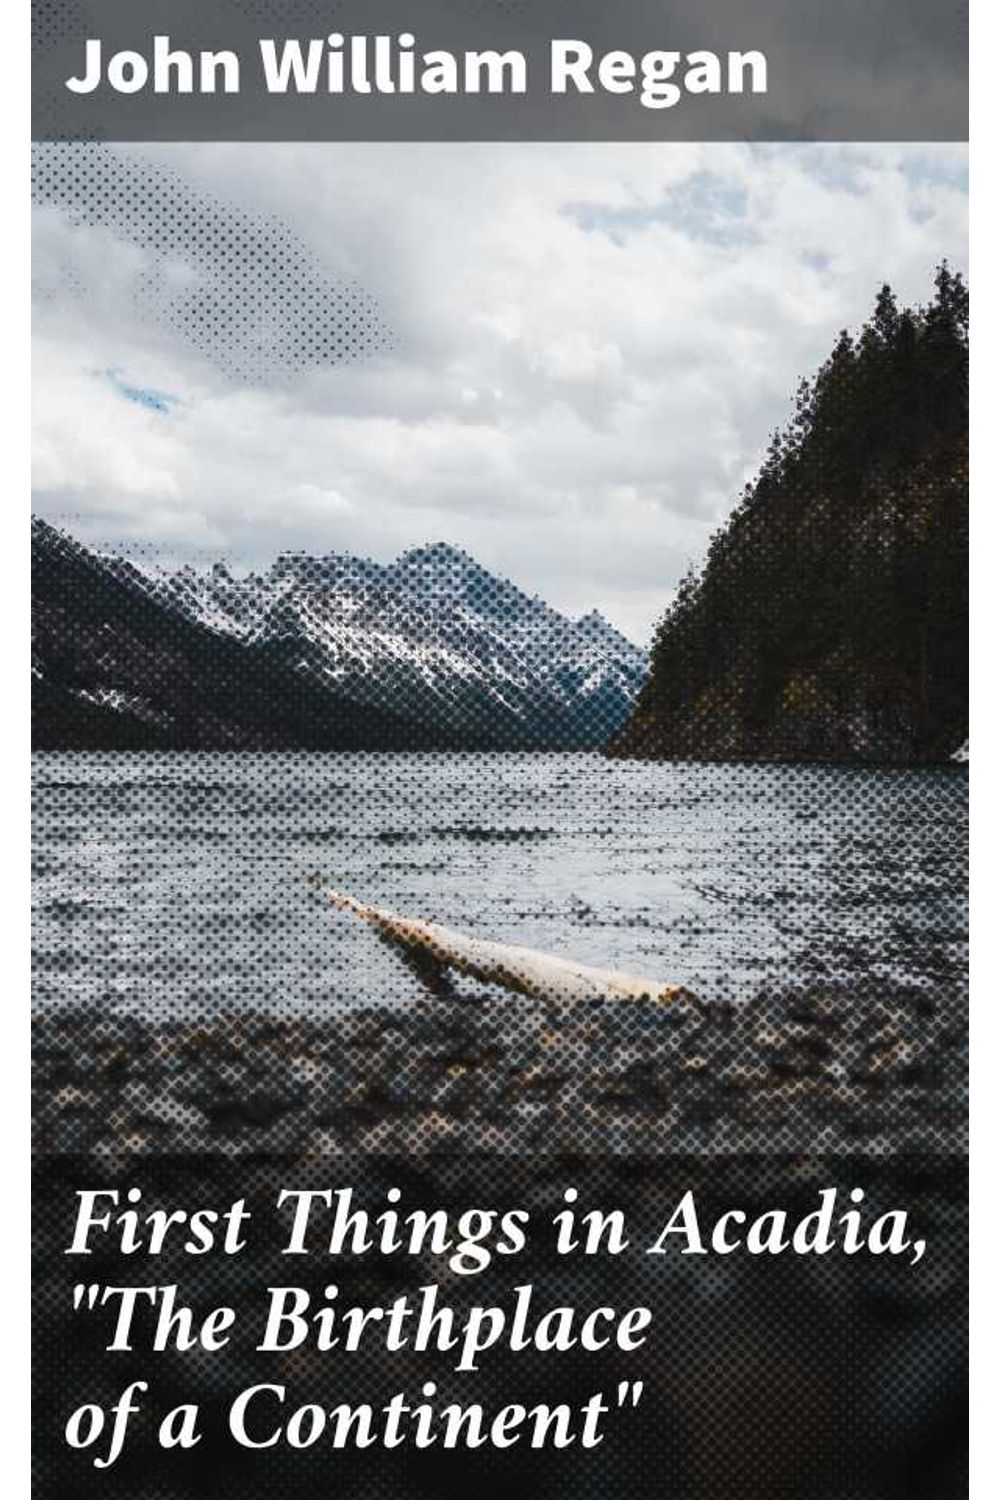 bw-first-things-in-acadia-quotthe-birthplace-of-a-continentquot-good-press-4064066355005